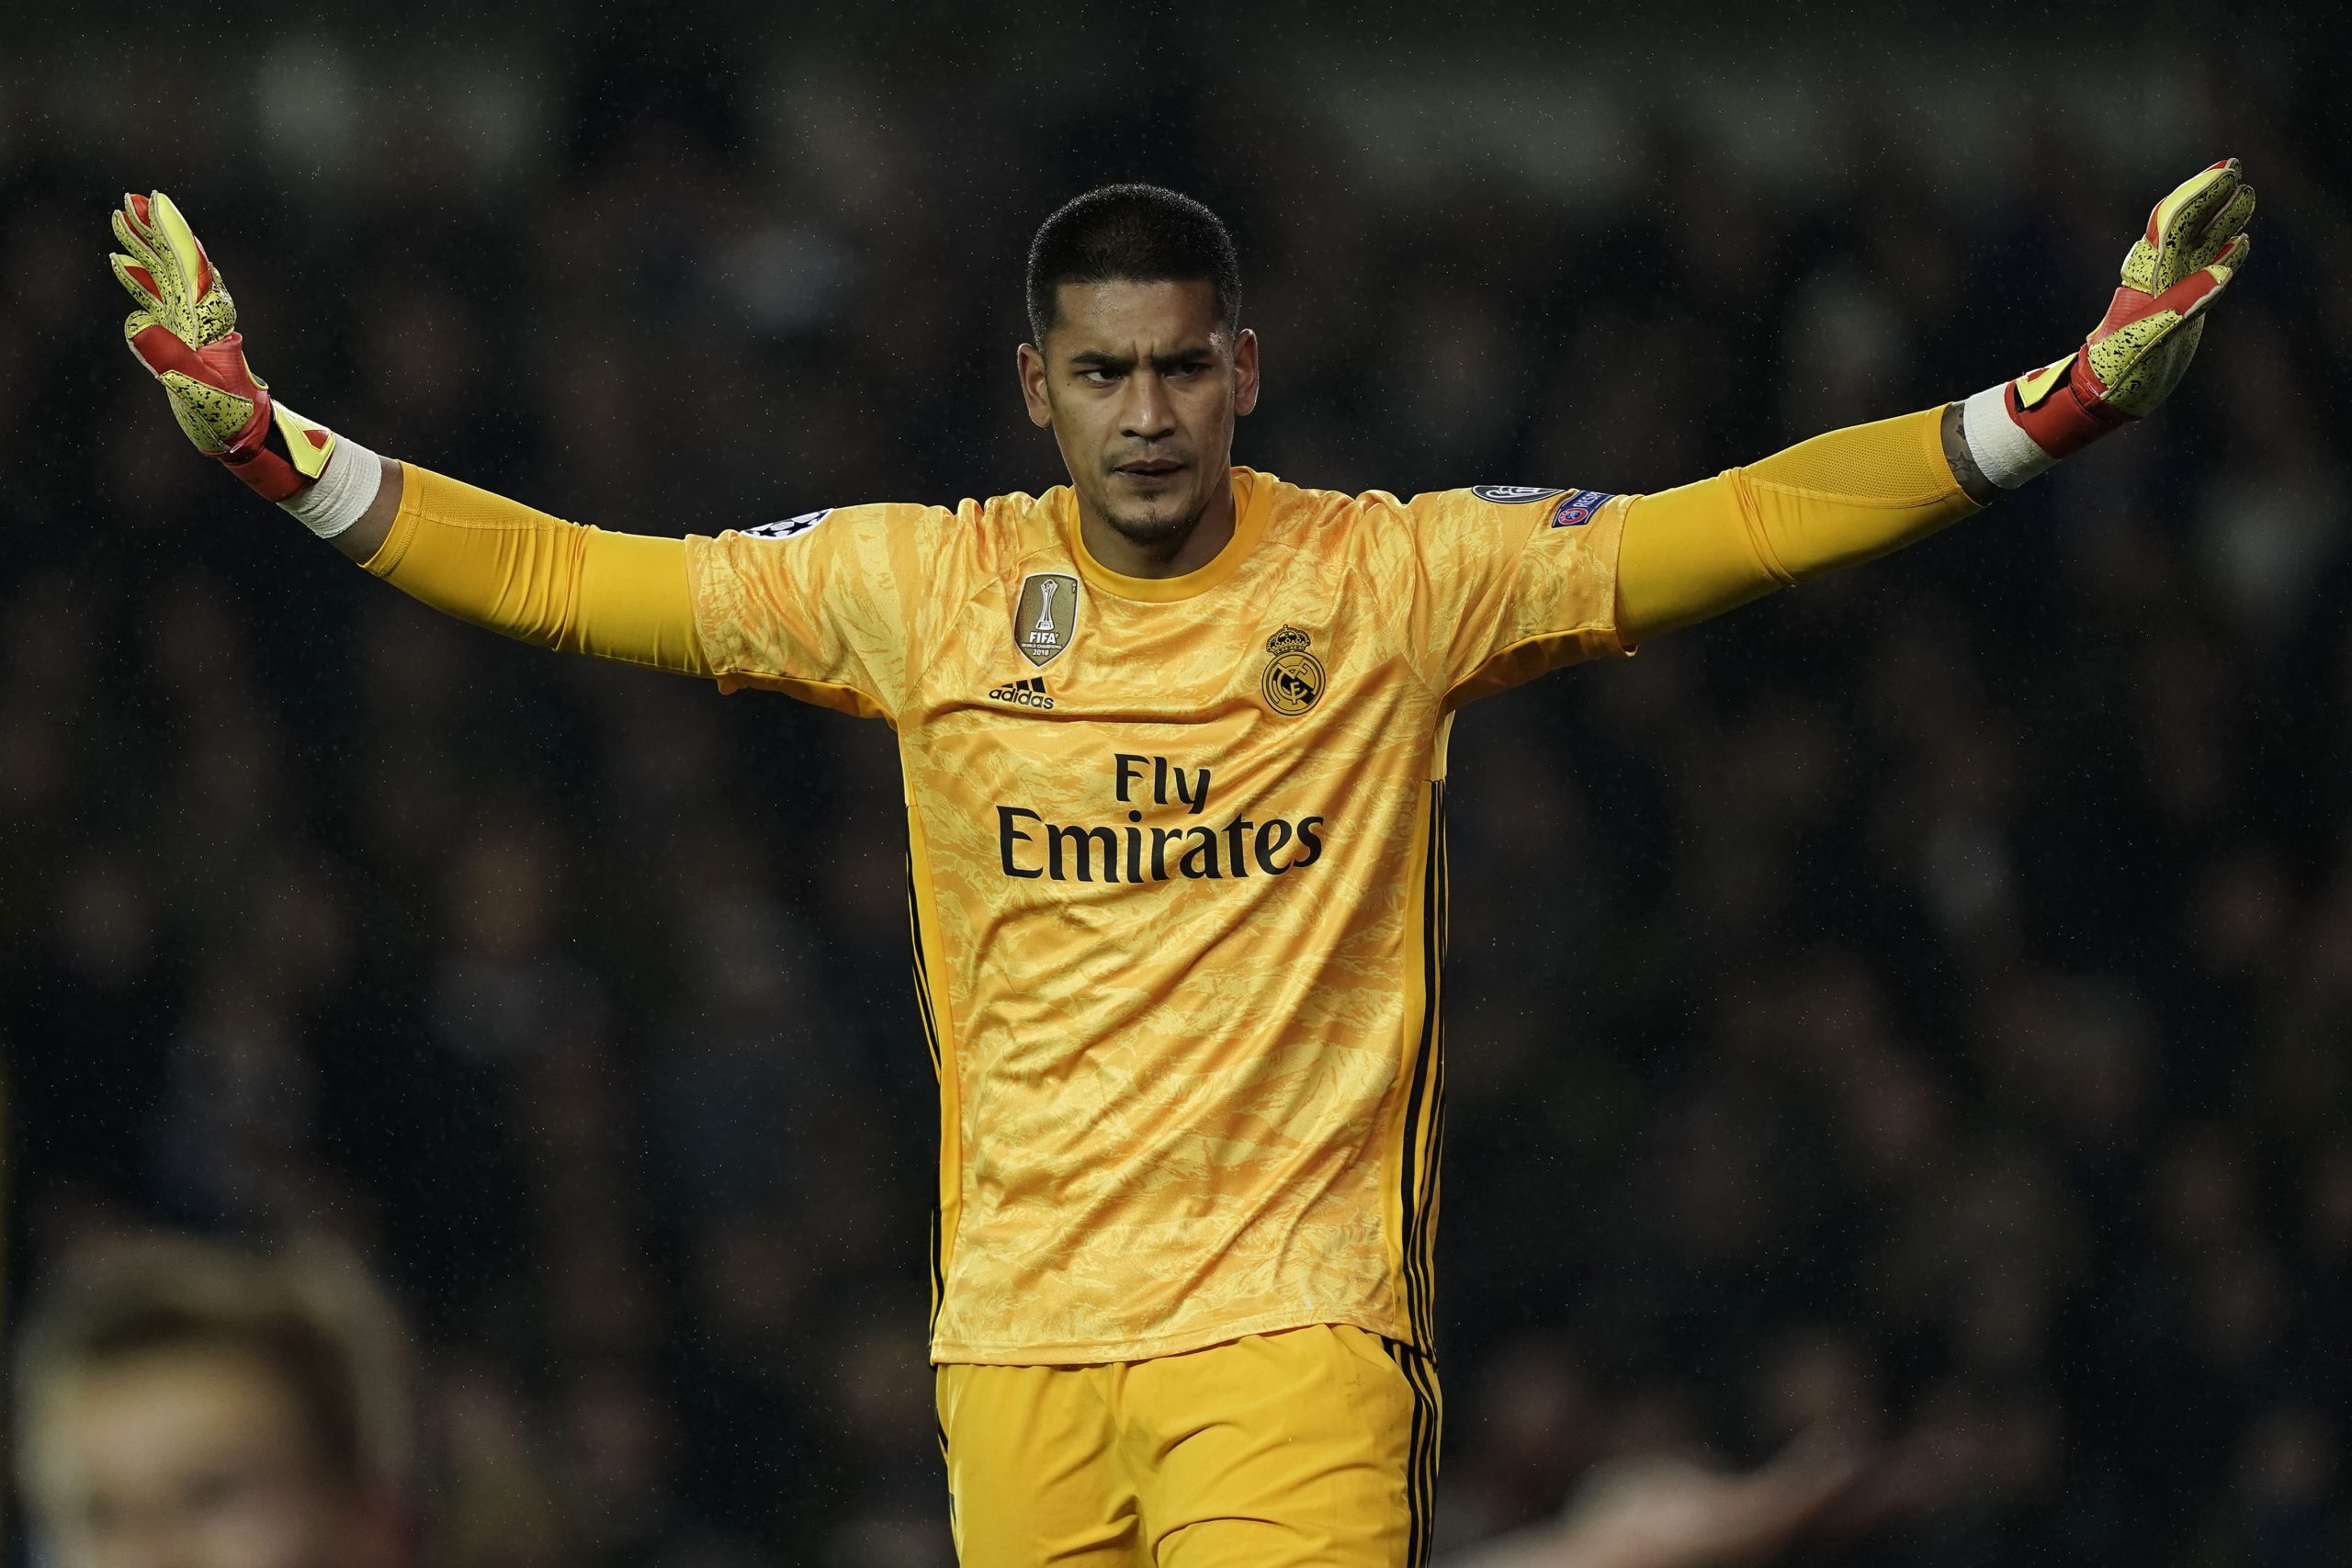 Alphonse Areola has won the La Liga title with Real Madrid this season on loan (Getty Images)